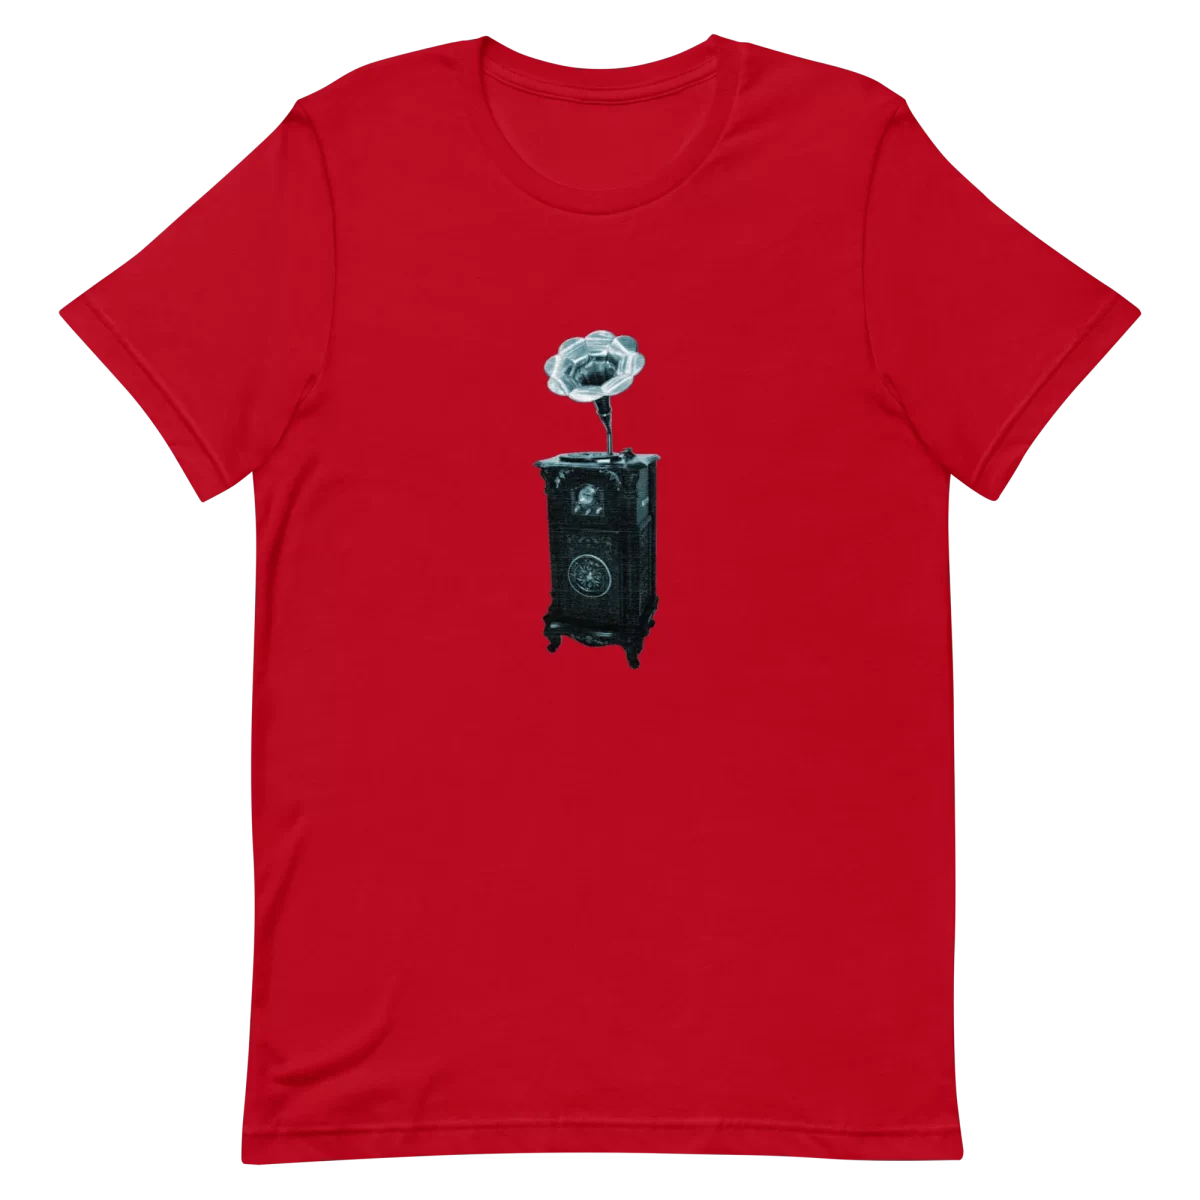 Red Unisex T-Shirt - Record Player